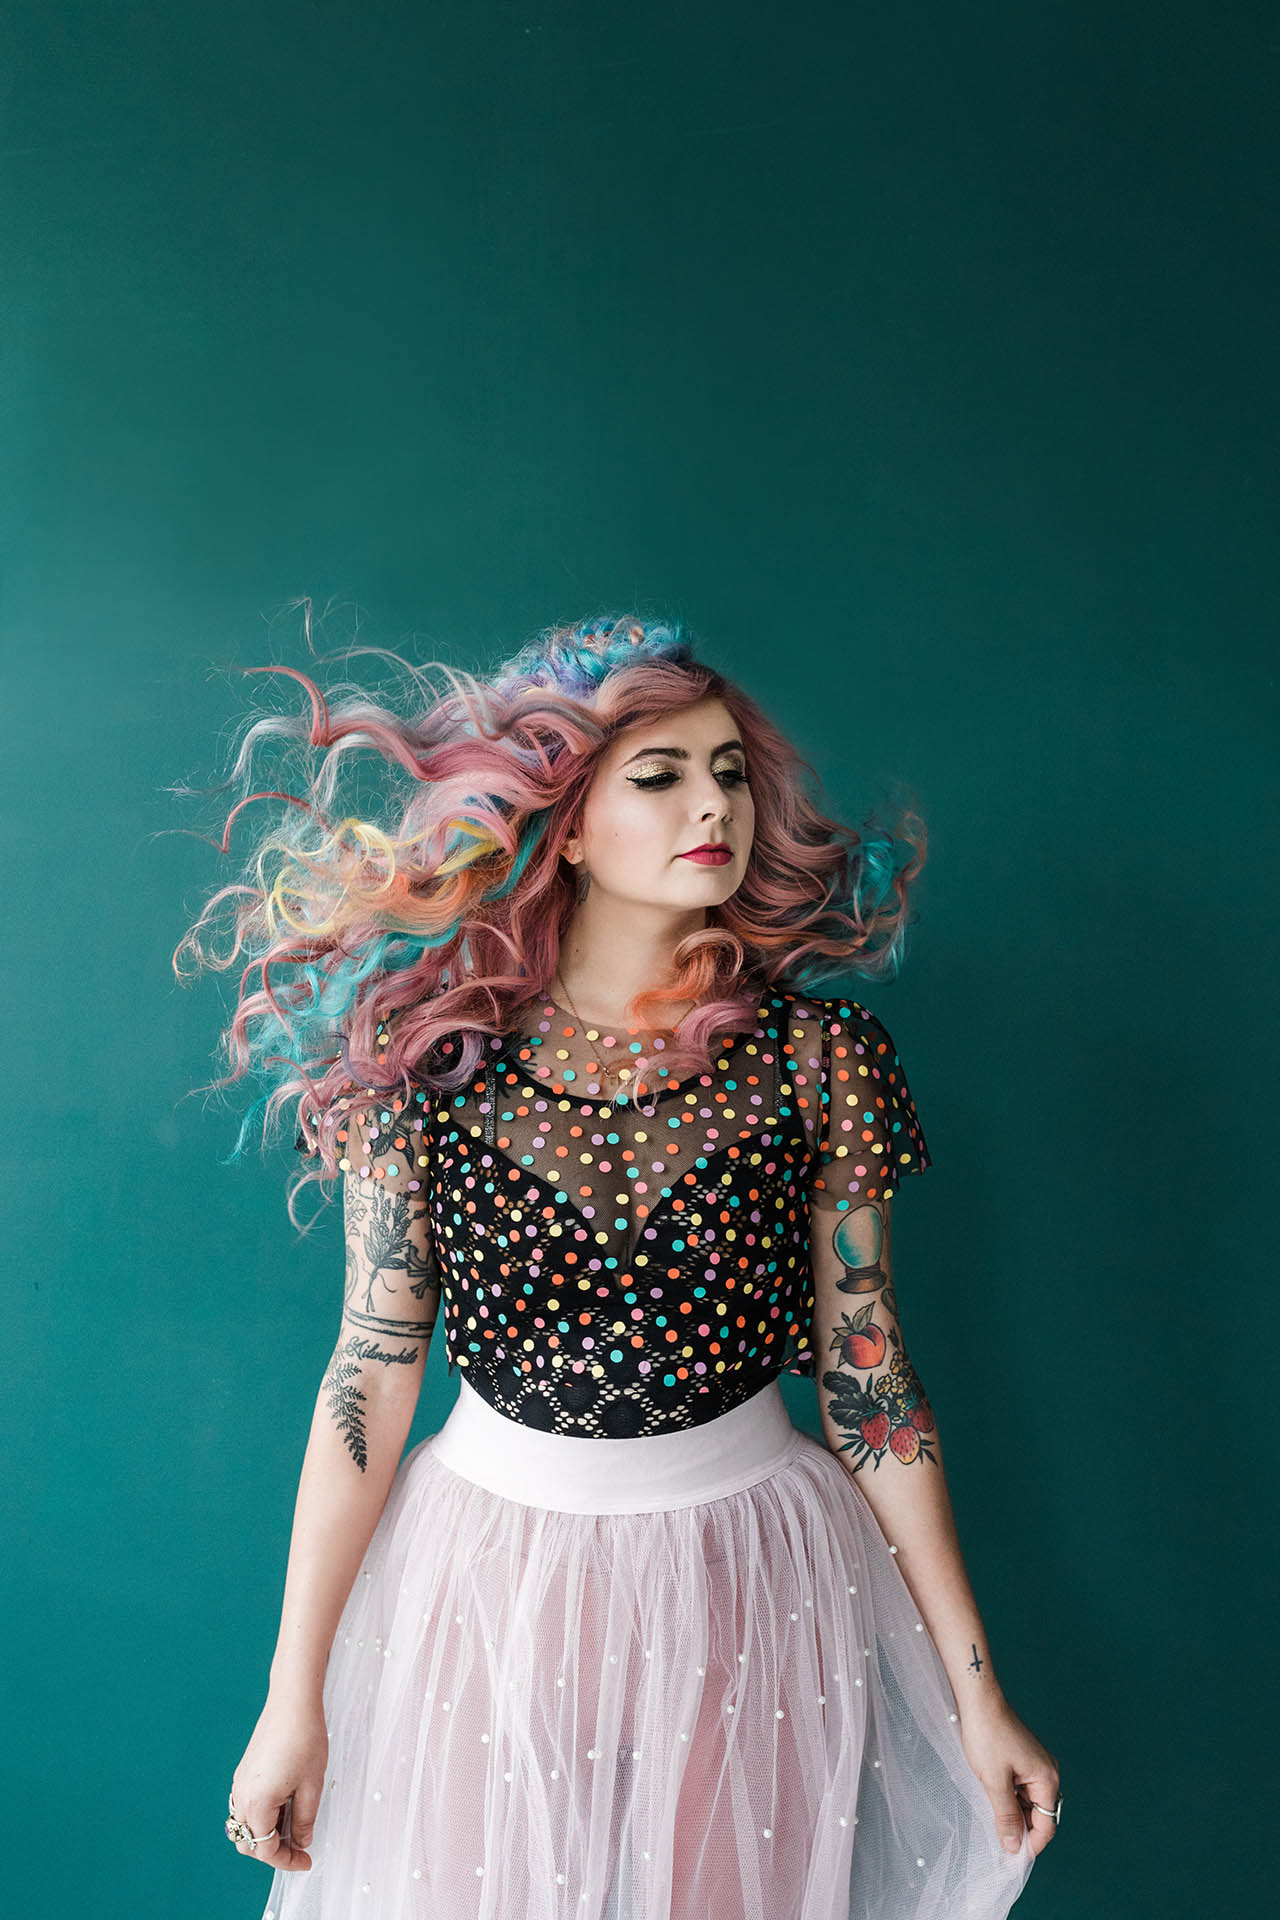 Dallas Commercial Photography; a woman with flowing multi-colored hair wearing elaborate makeup and a colorful, polka dotted top looking off into the distnace in front of a blue background